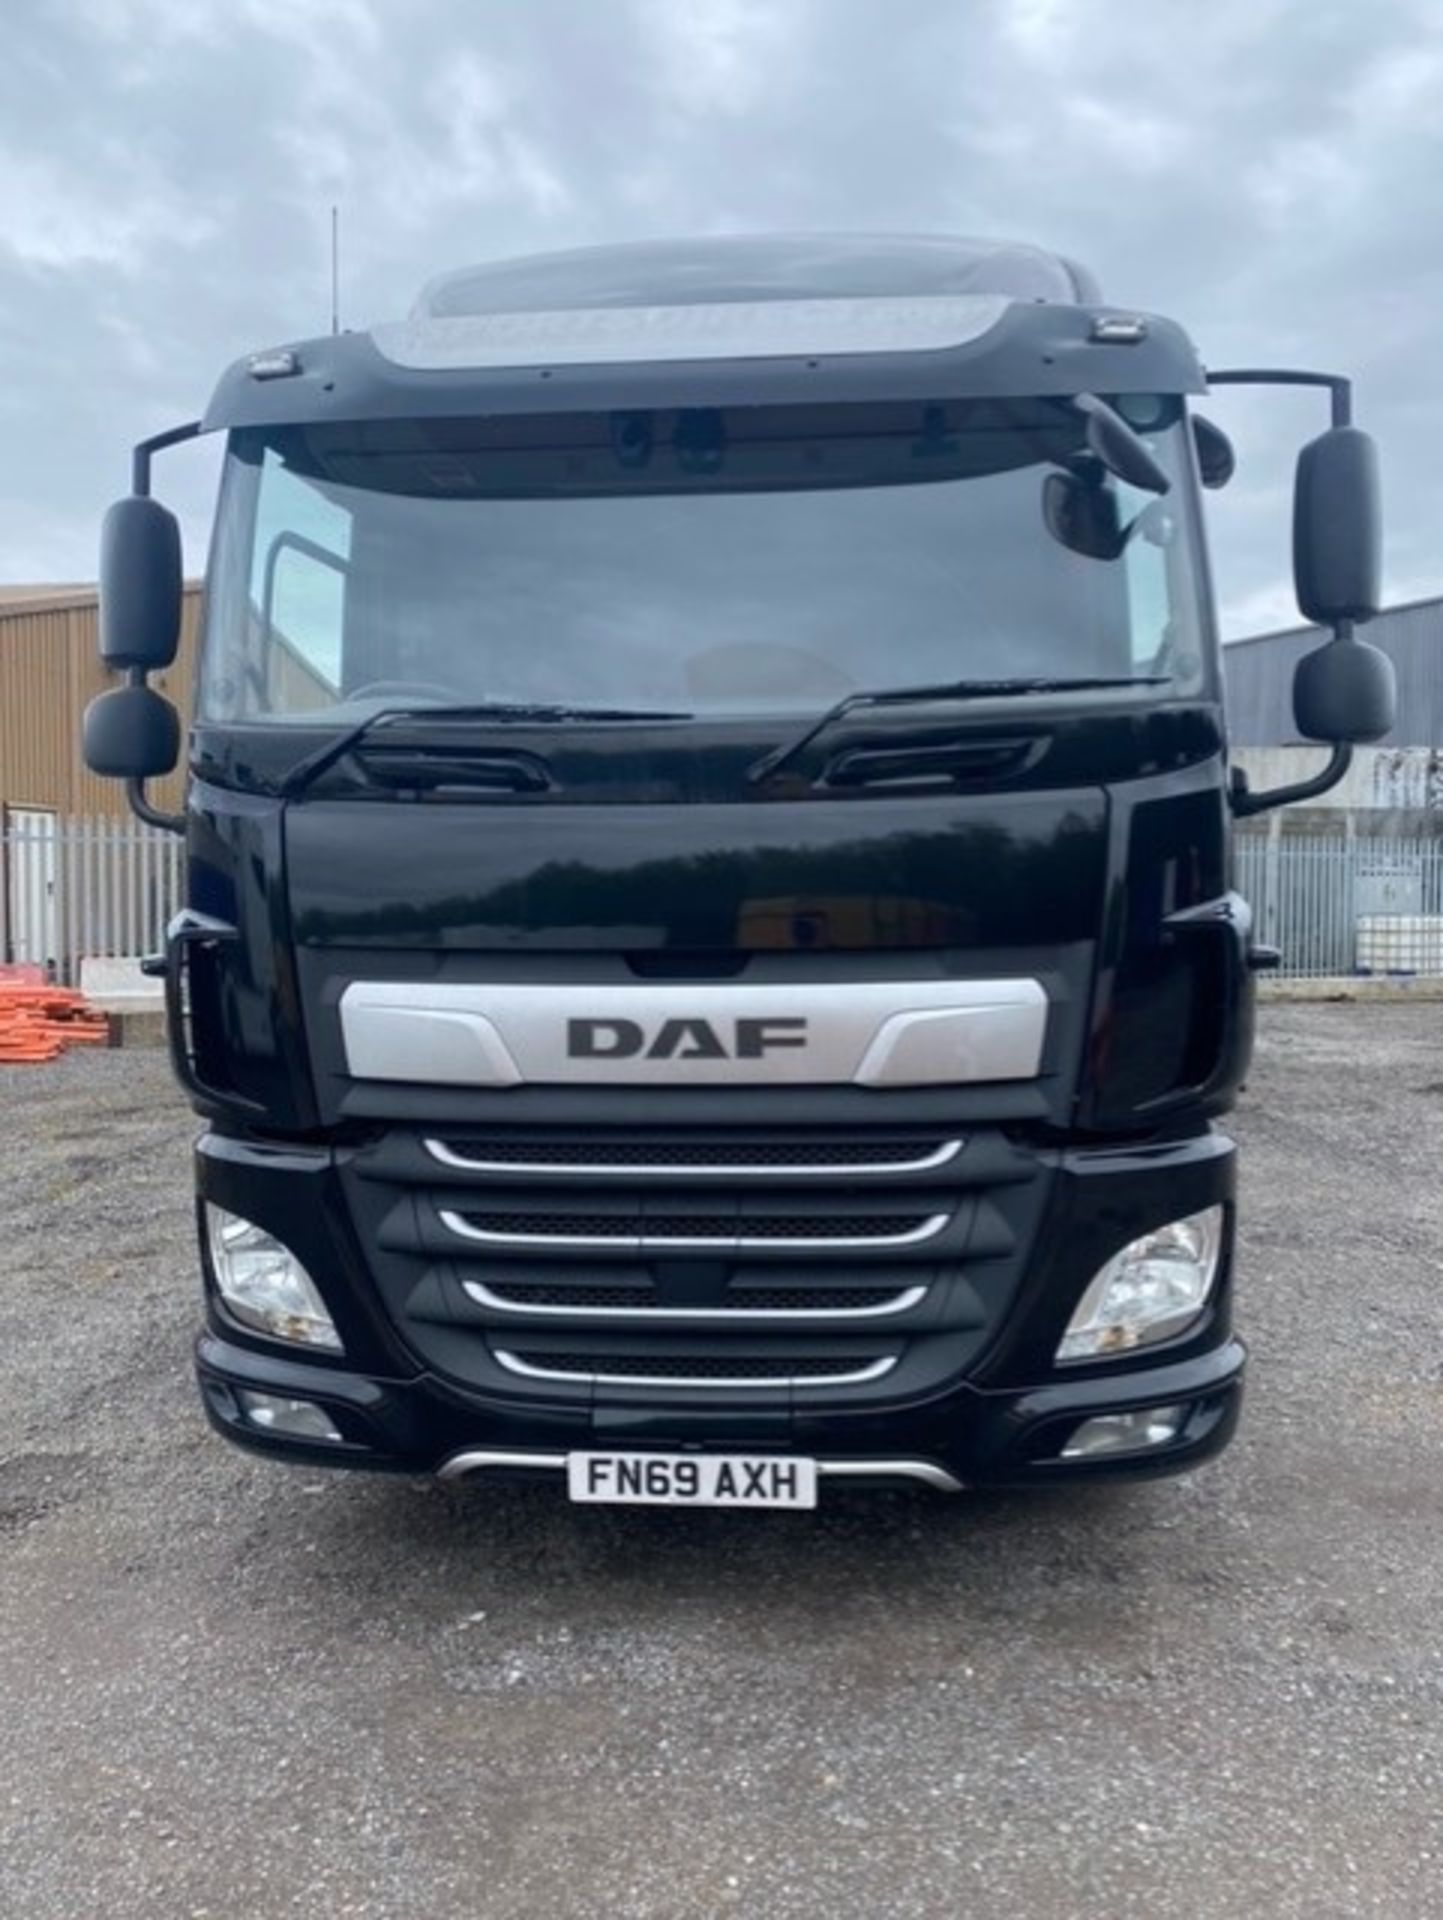 2019, DAF CF 260 FA - FN69 AXH (18 Ton Rigid Truck with Tail Lift) - Image 18 of 22